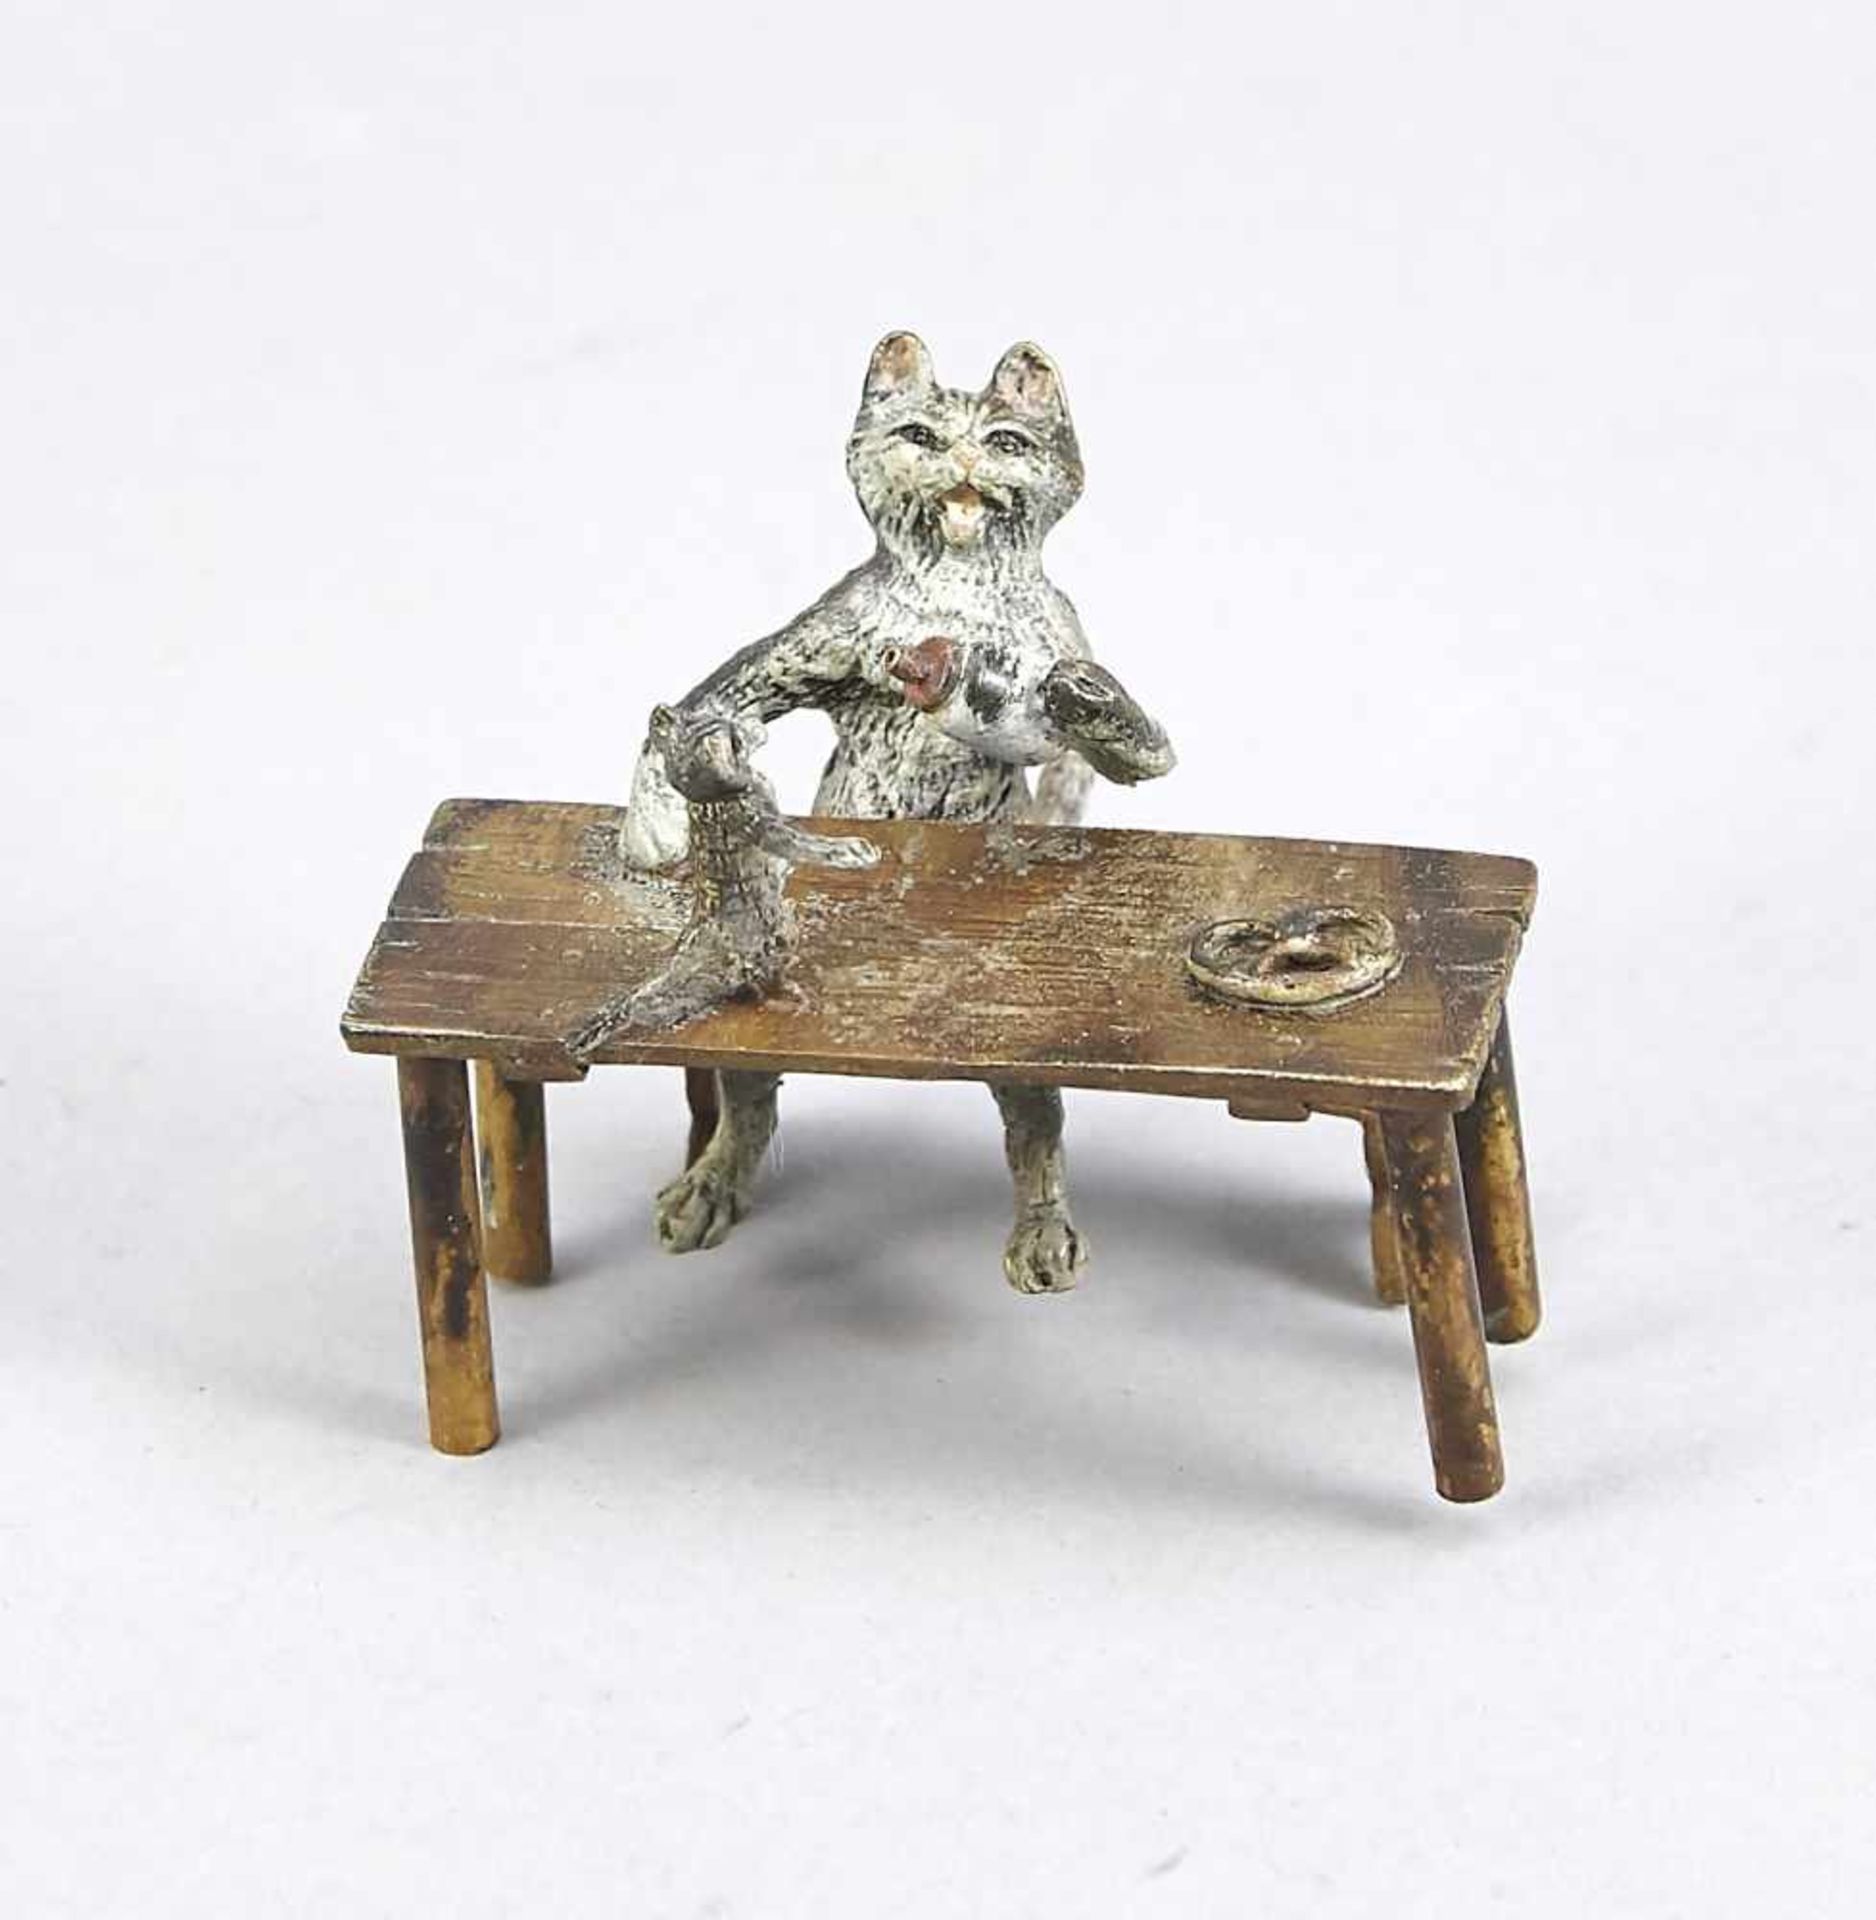 Vienna bronze, 20th century, cat sitting on a bench with pretzel and giving her boy a milk